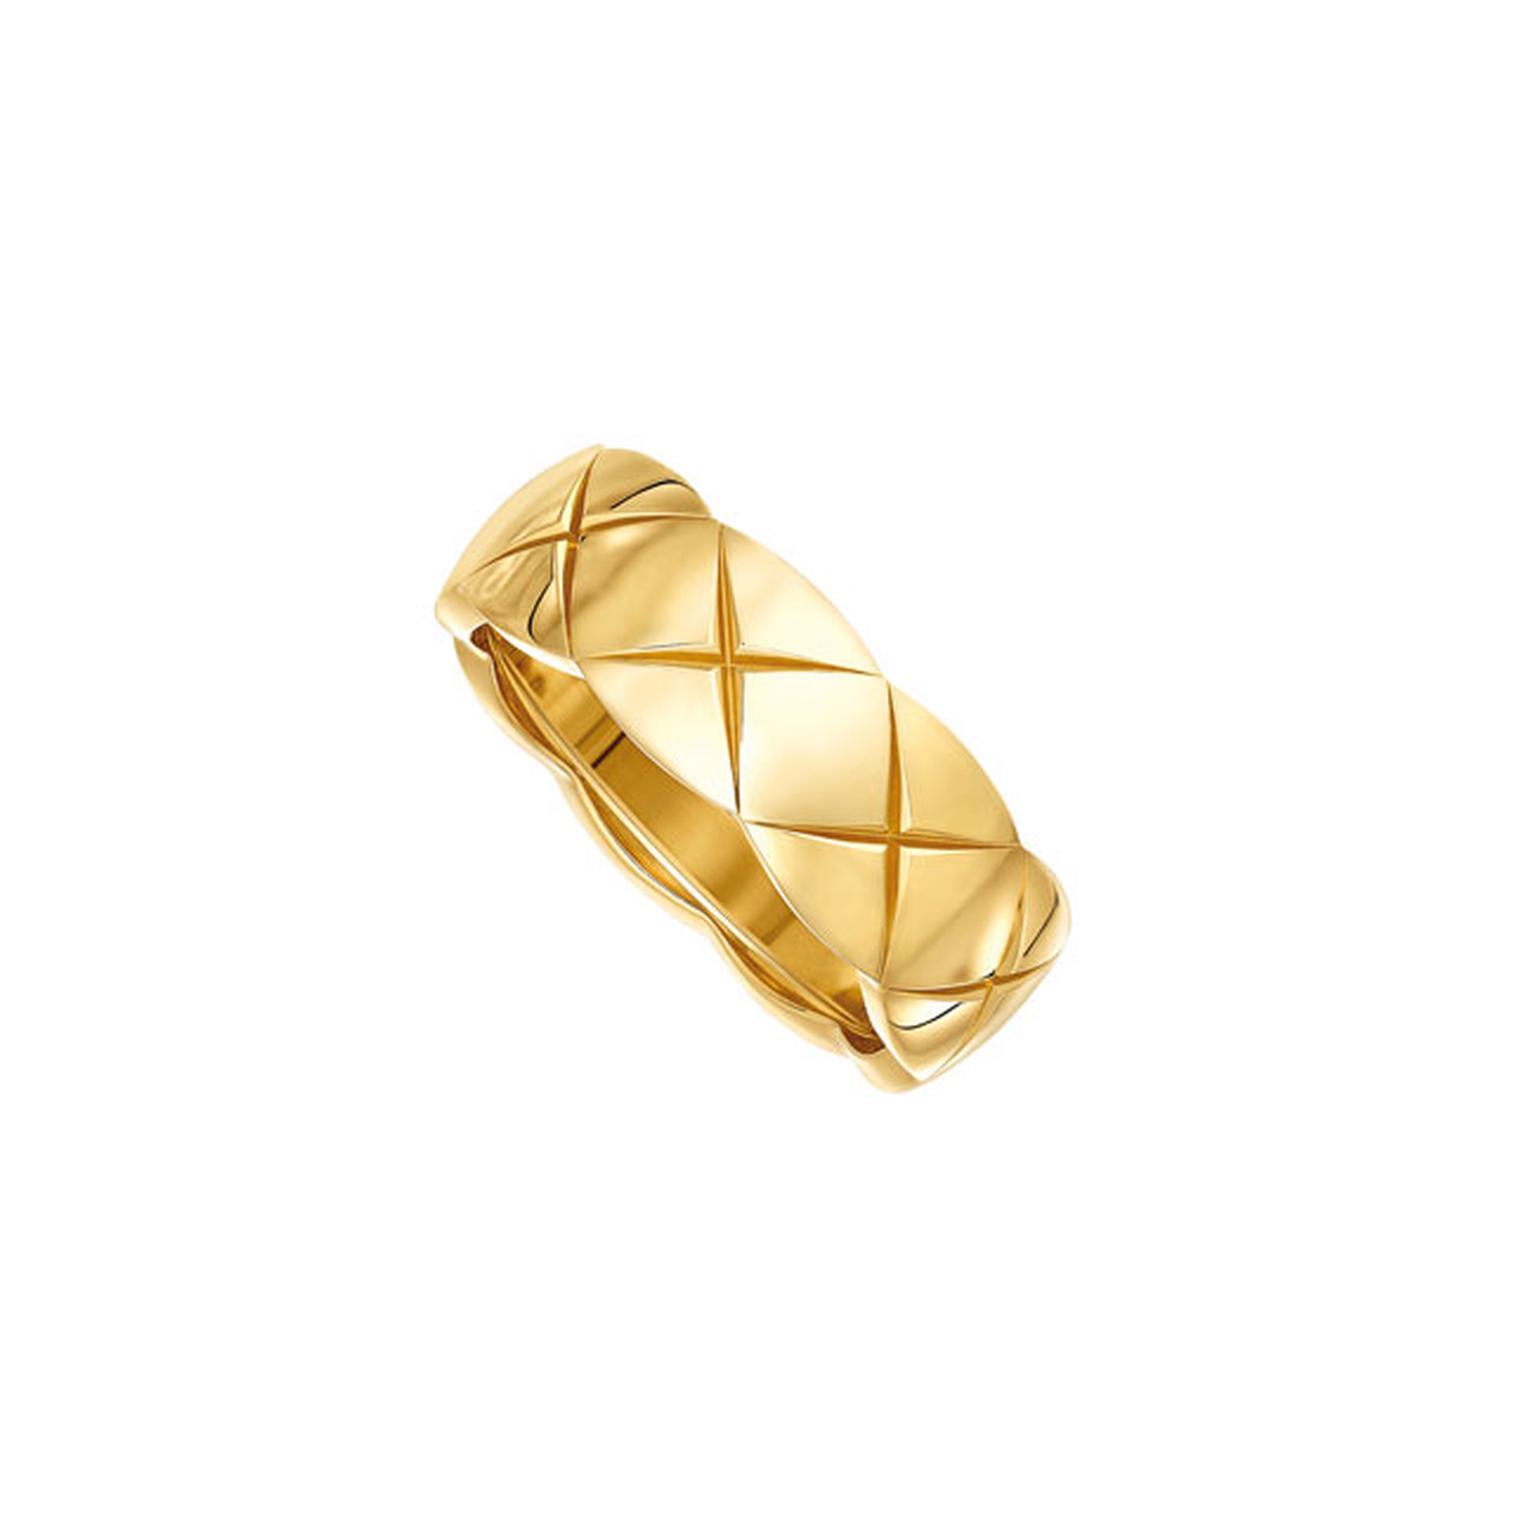 Chanel Coco Crush small 18ct yellow gold ring_main